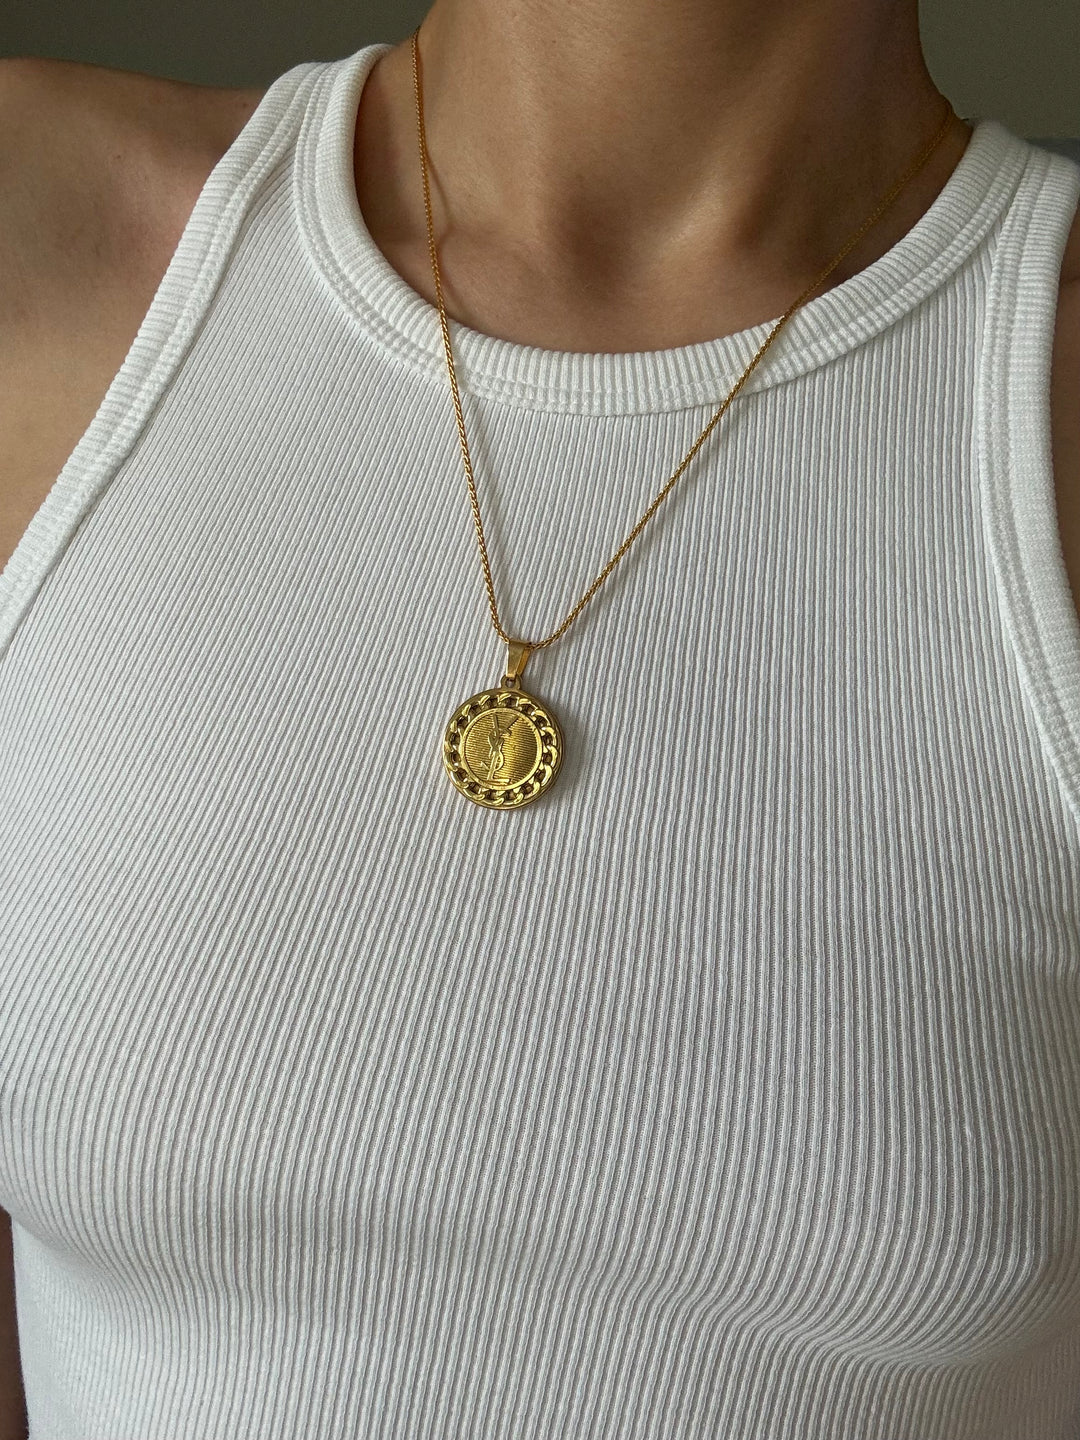 YSL Button Necklace